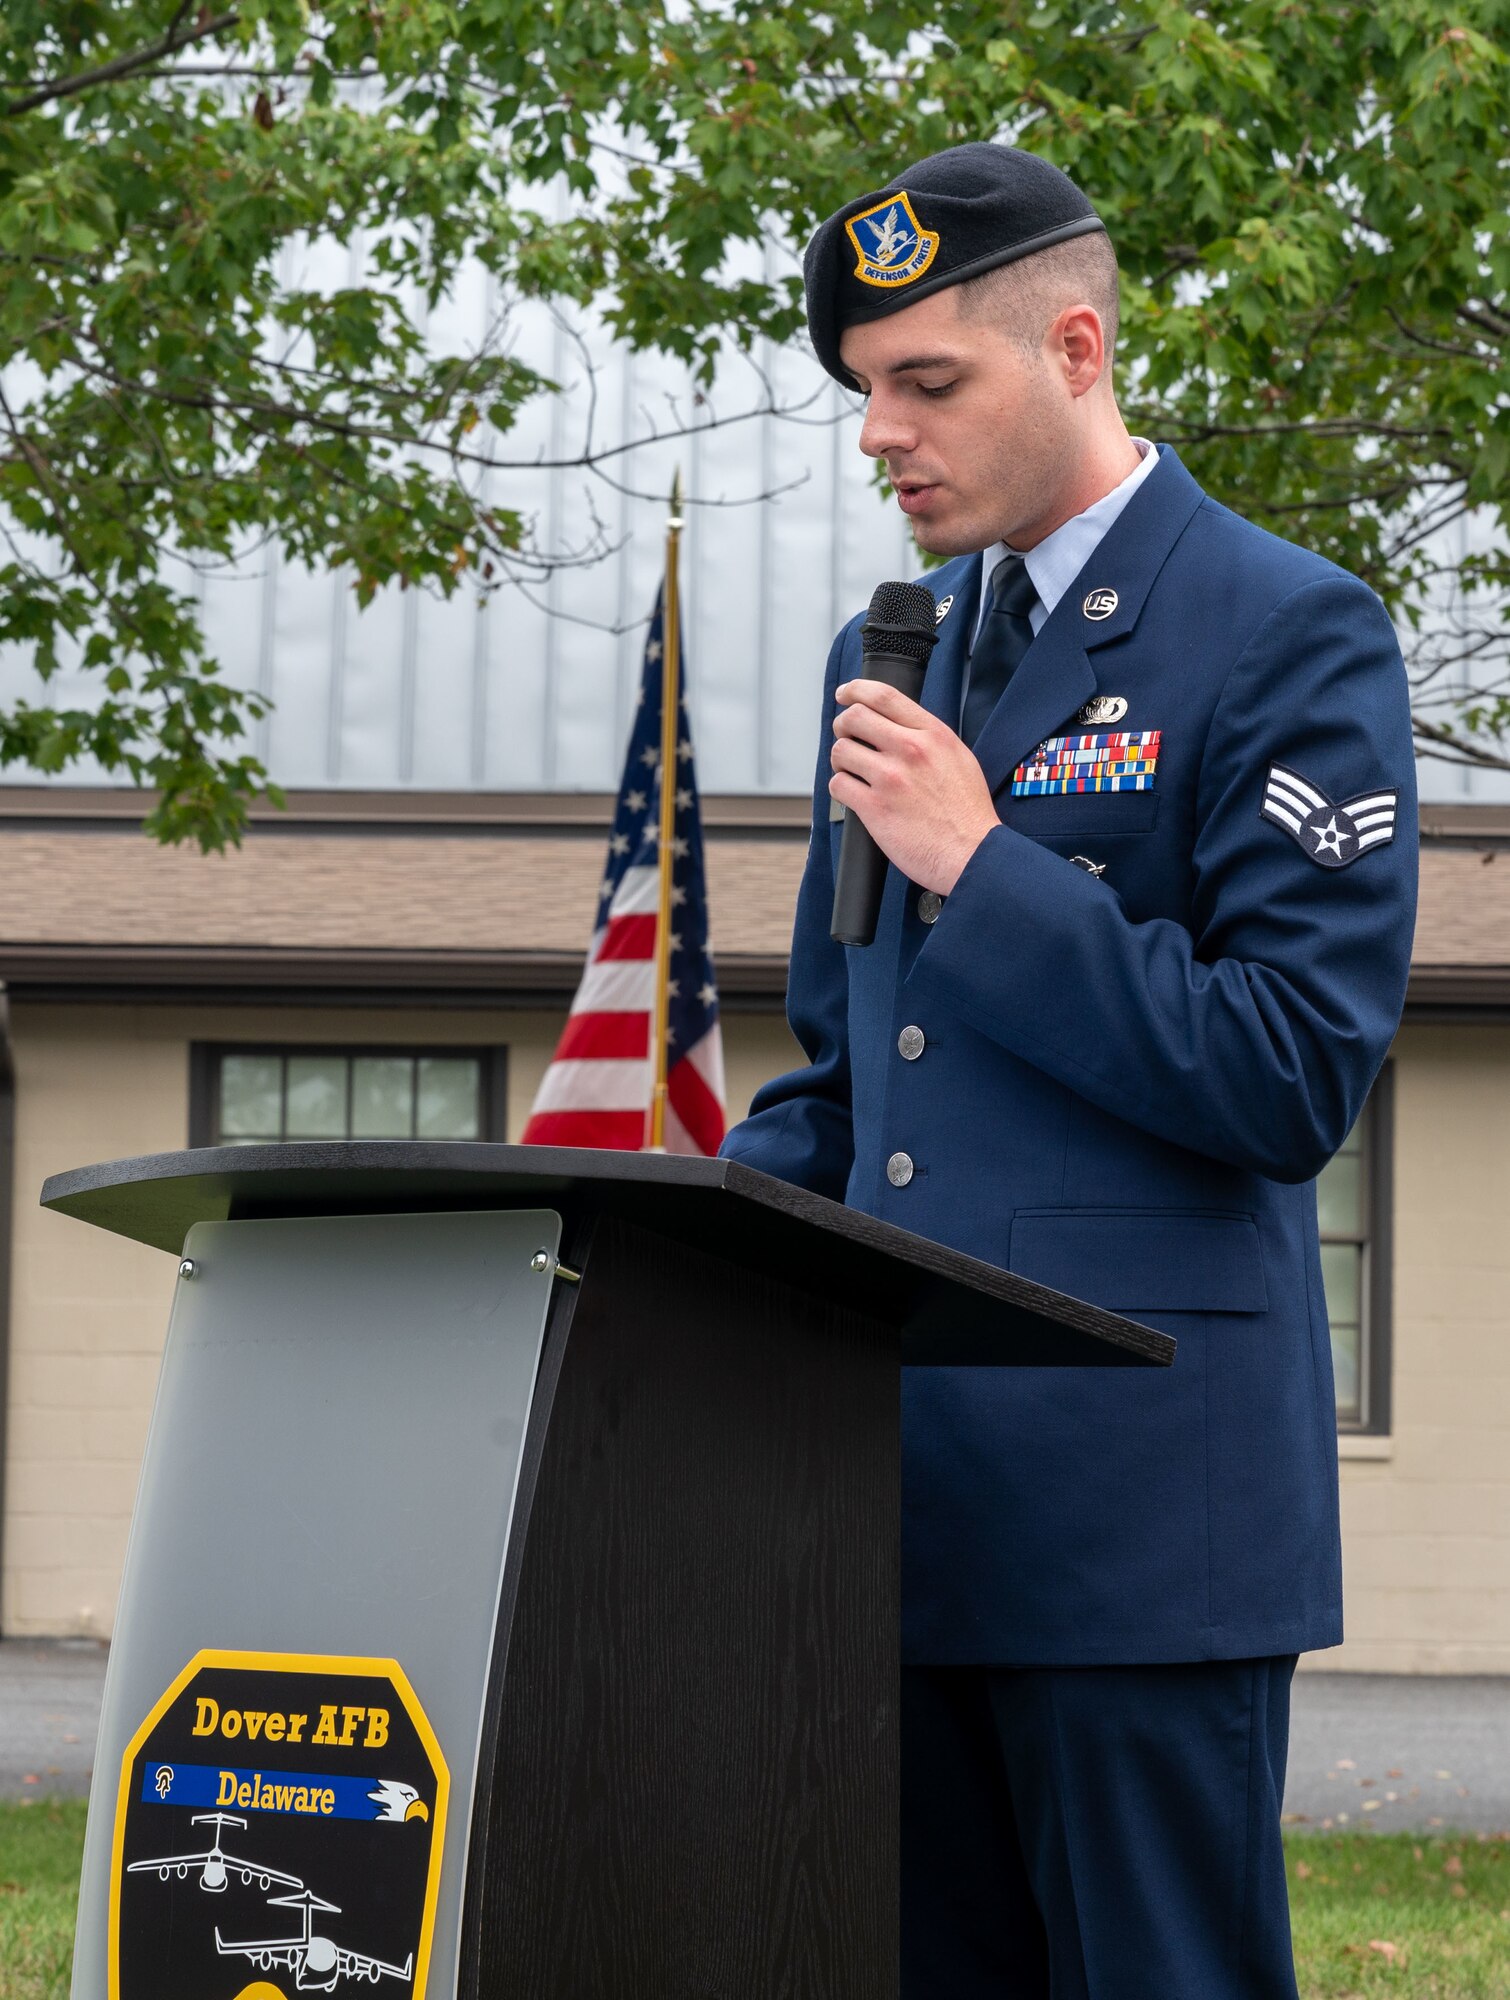 Senior Airman Austin Corvo, 436th Security Forces Squadron response force member, recites the Security Forces Prayer during the 21st Anniversary 9/11 Memorial Ceremony held at the Air Mobility Command Museum on Dover Air Force Base, Delaware, Sept. 11, 2022. The base hosted the ceremony to remember and honor those who perished in the attacks on Sept. 11, 2001. (U.S. Air Force photo by Senior Airman Cydney Lee)